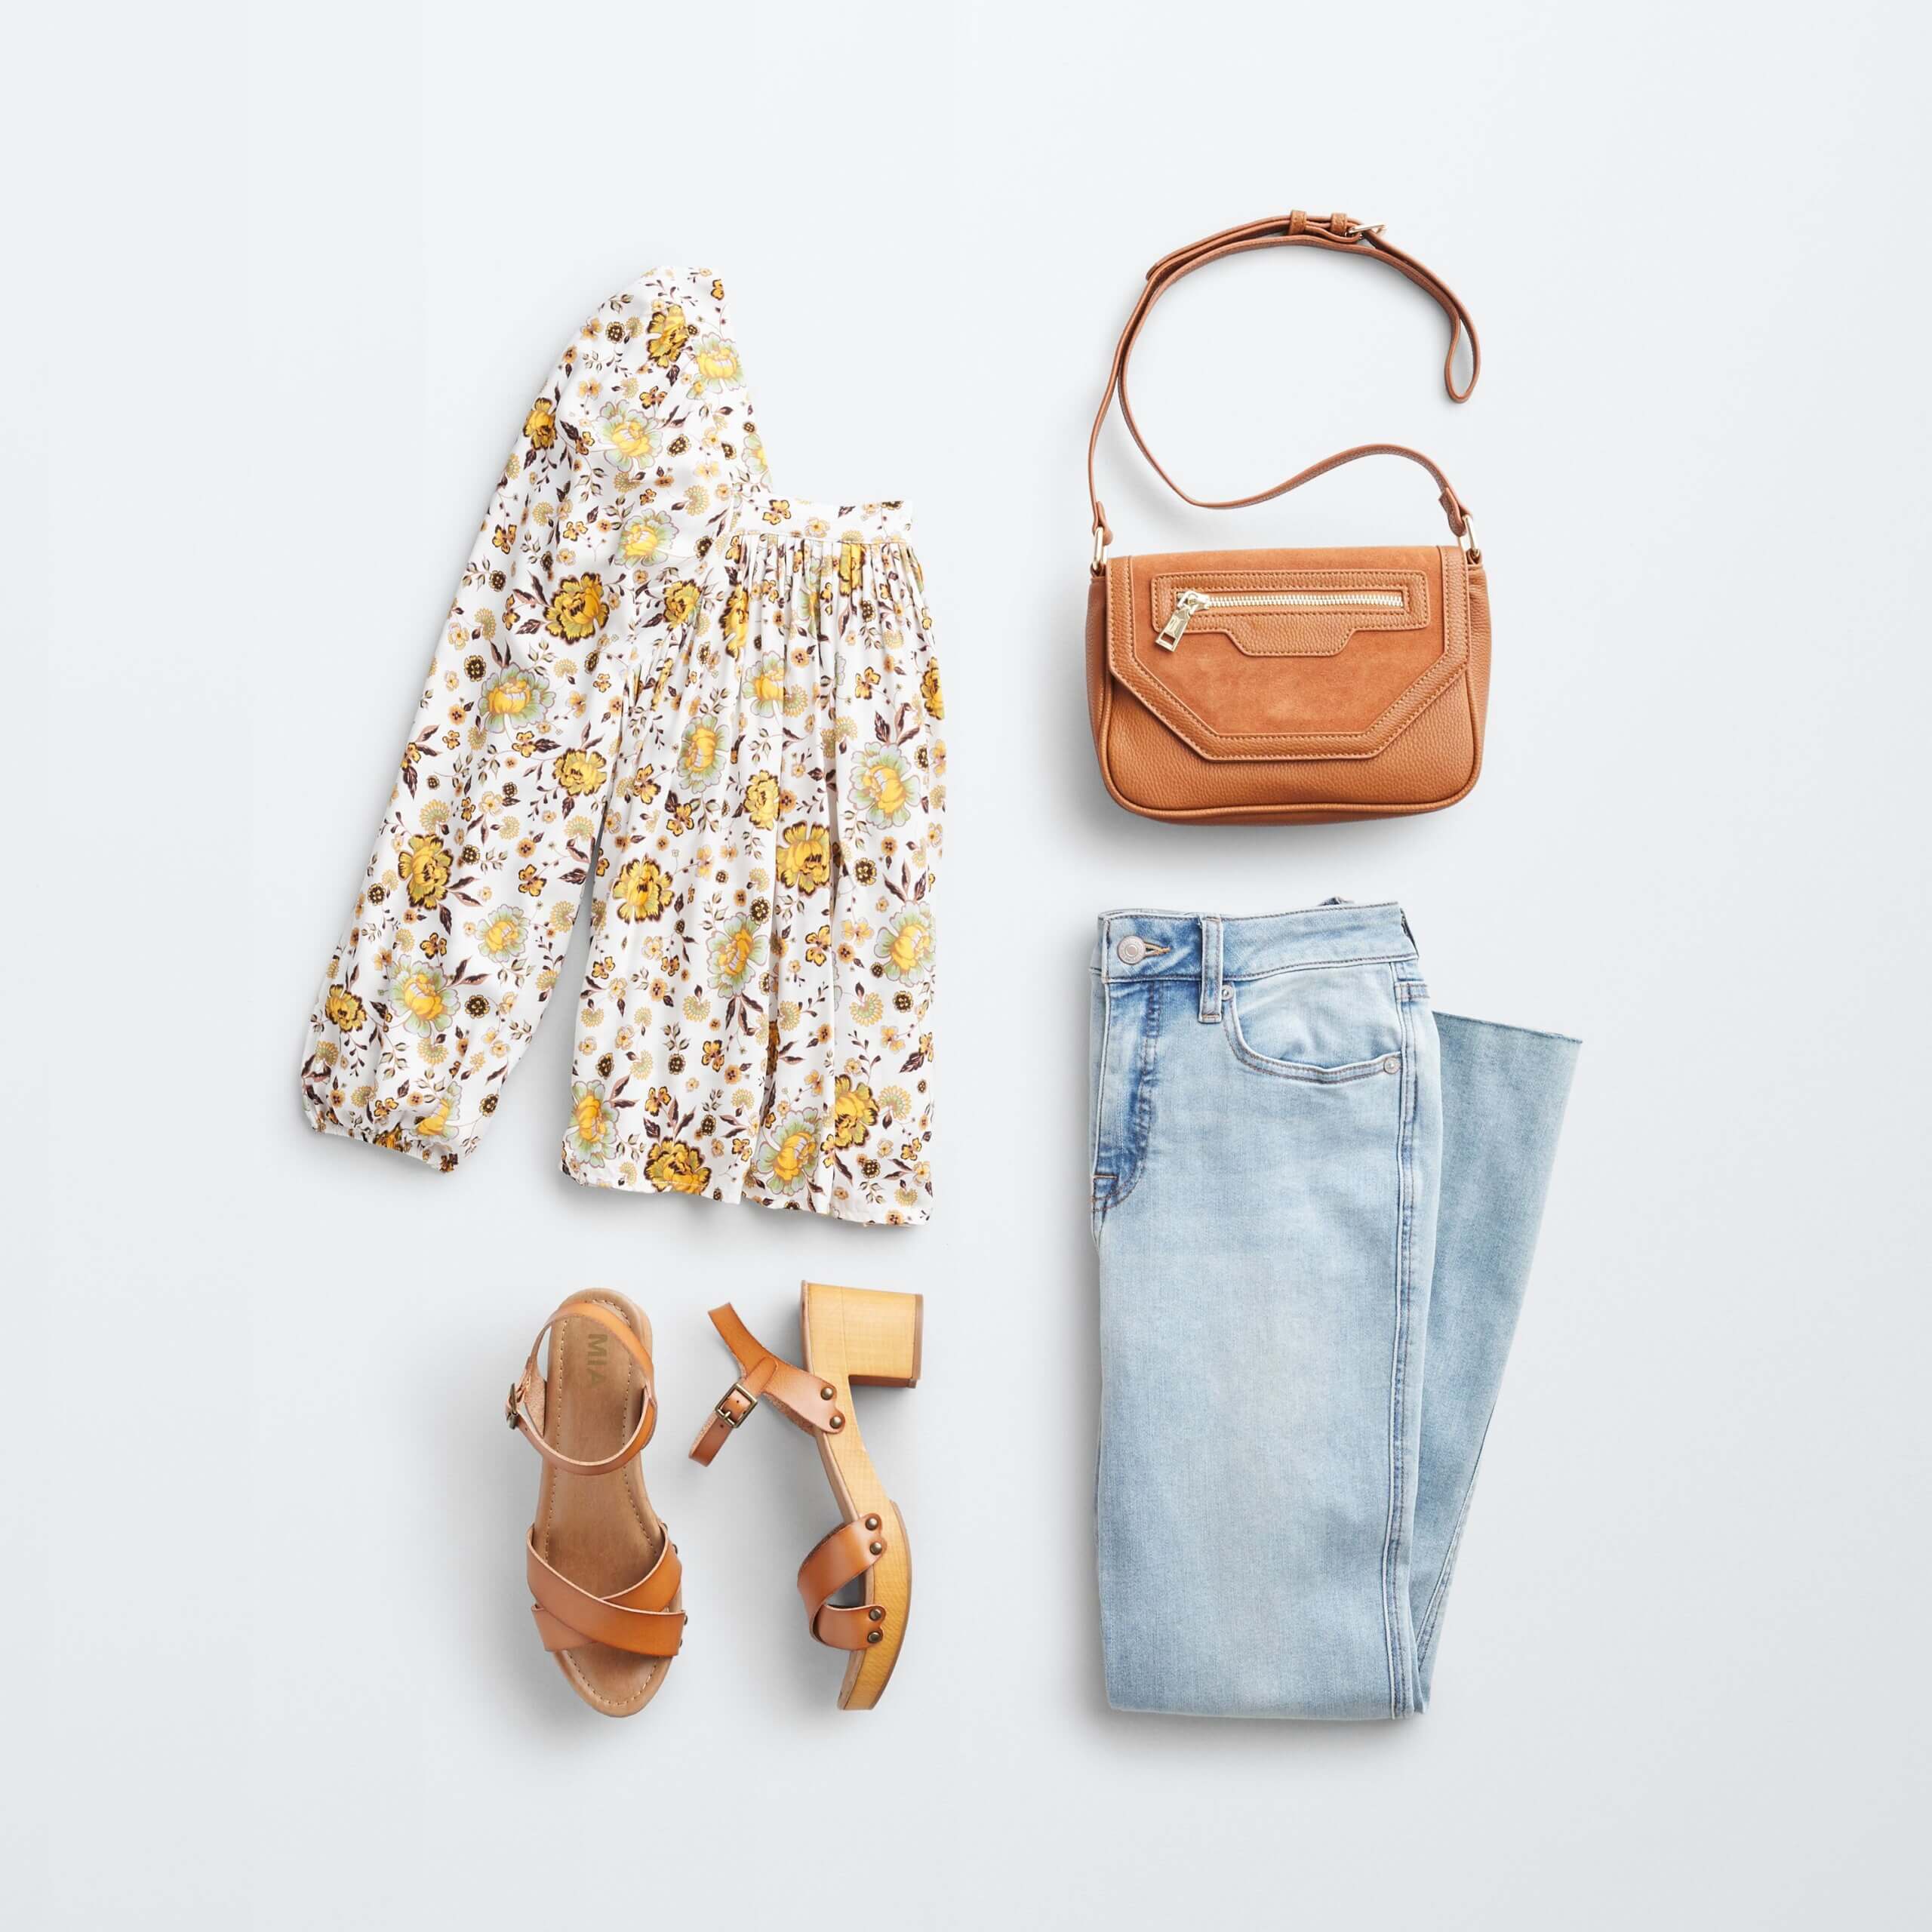 Stitch Fix Women's outfit laydown featuring white boho blouse with yellow florals, brown wooden heels, light wash cropped flare jeans and brown crossbody bag. 